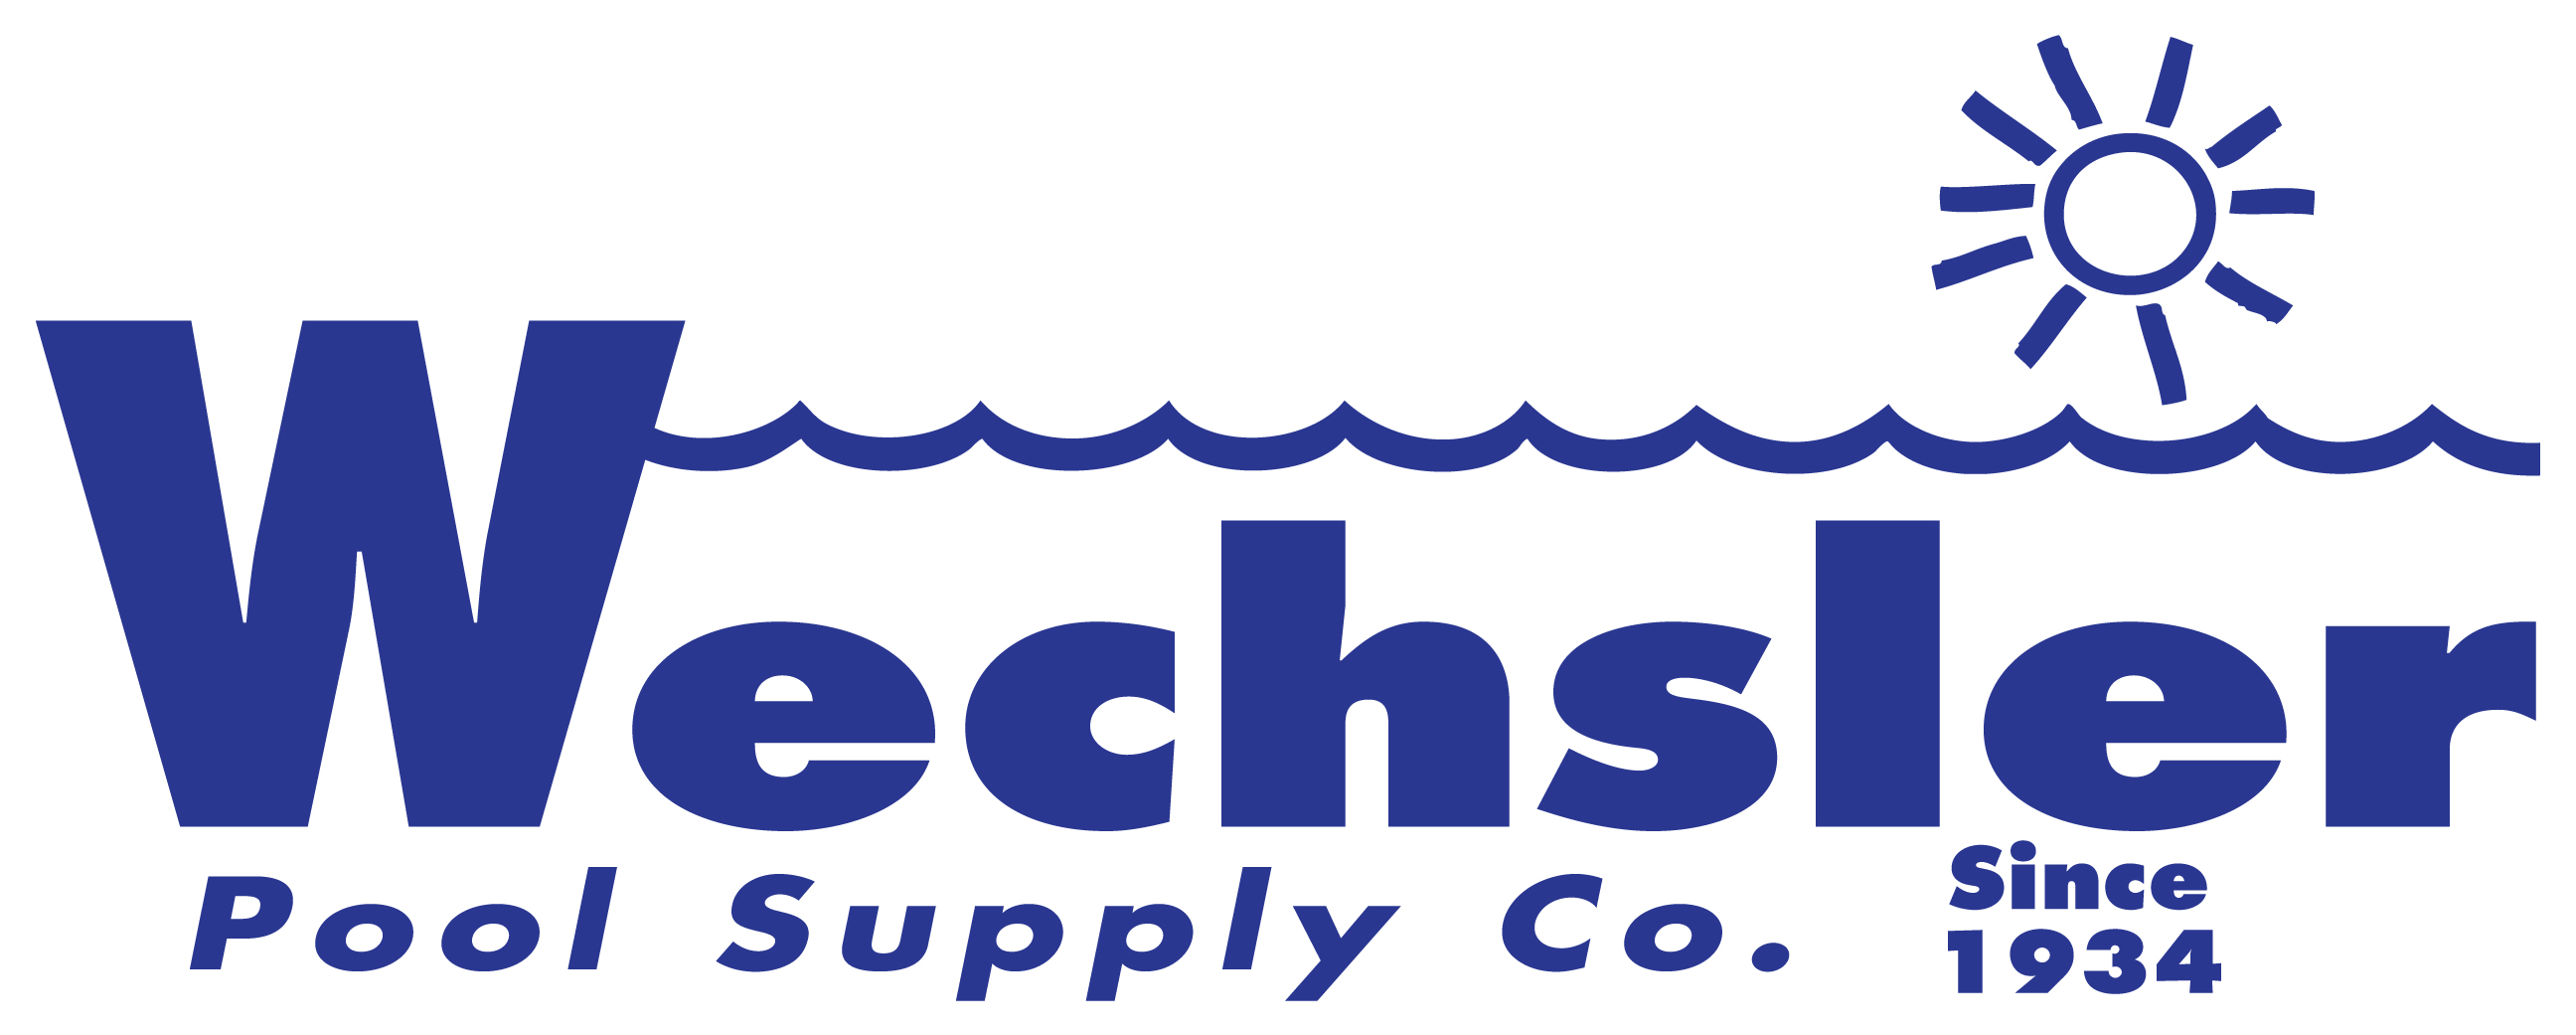 Wechsler Pool Supply Company